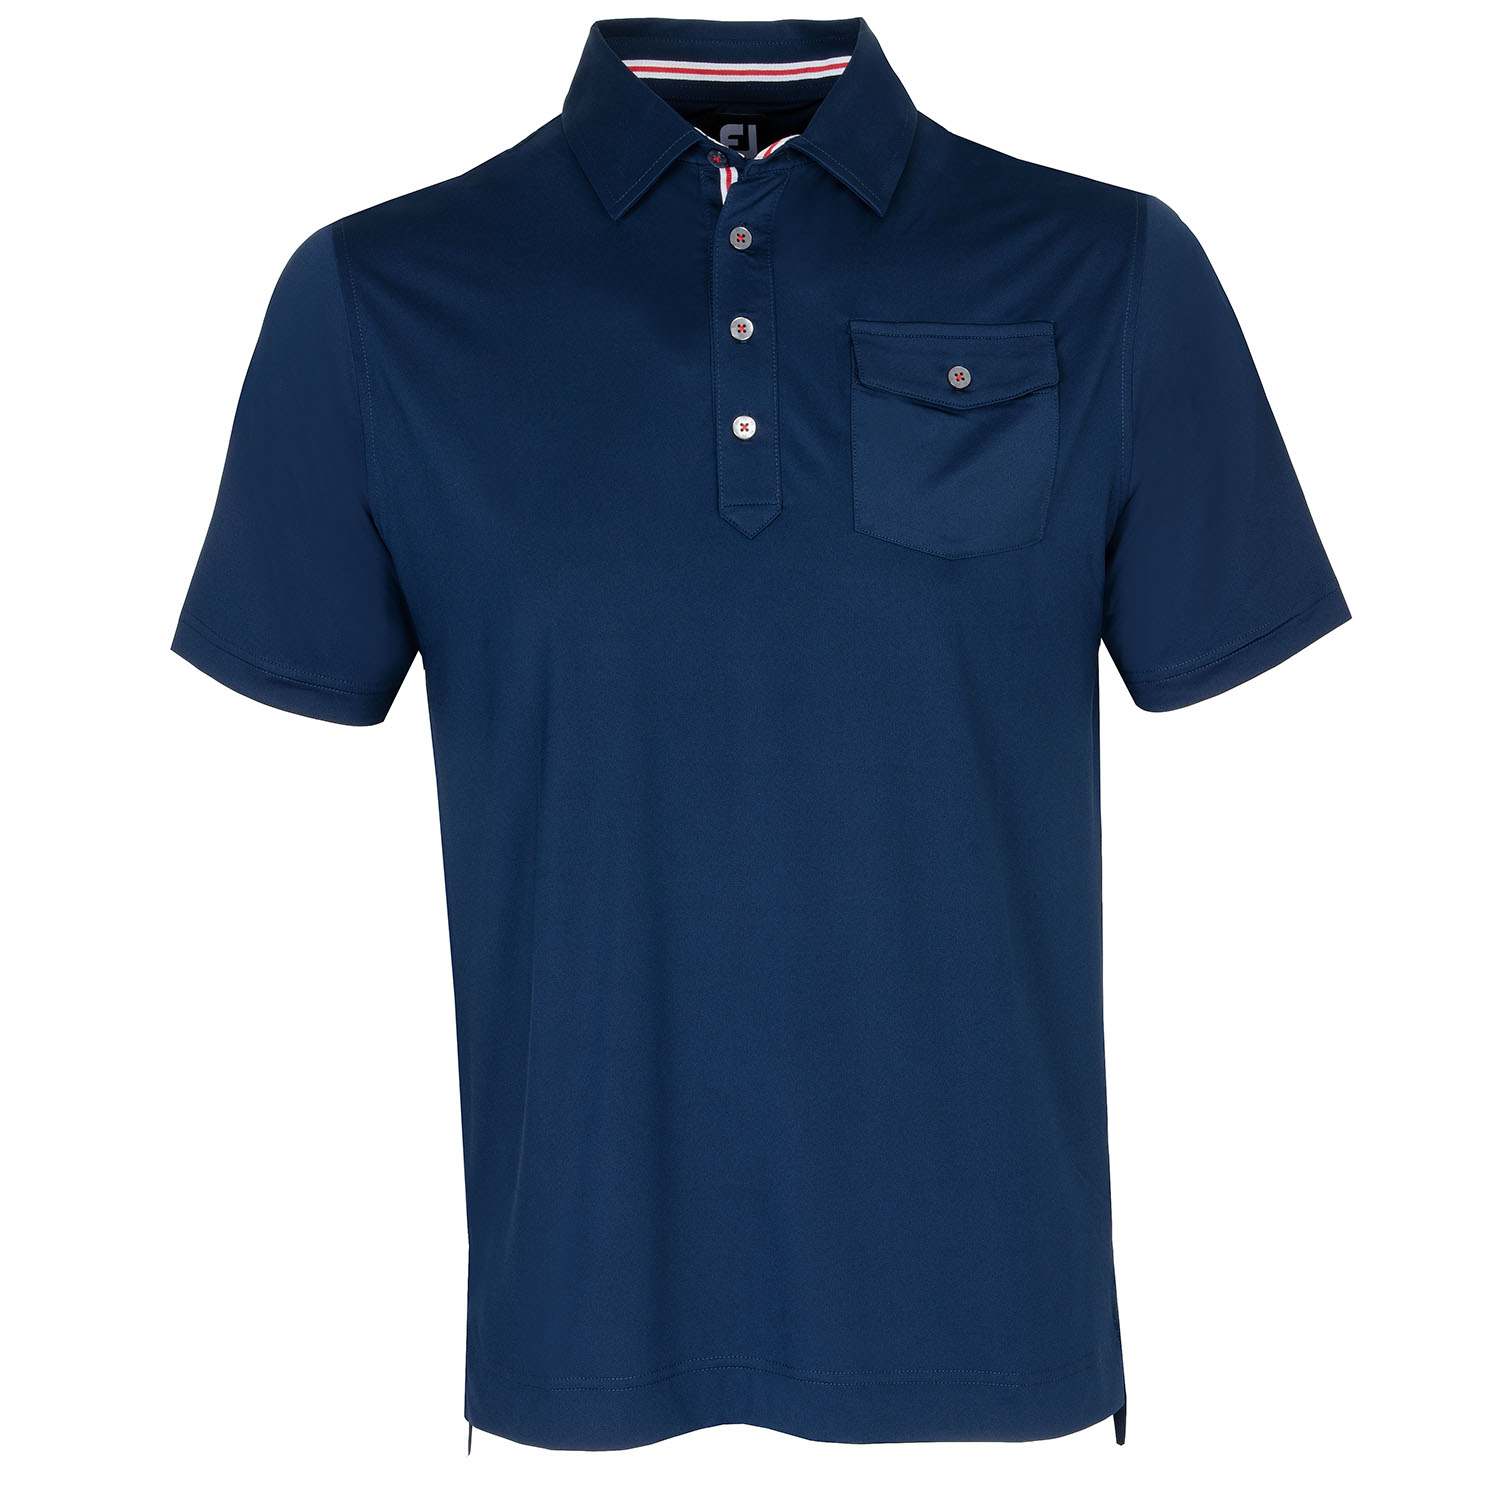 FootJoy 100th Anniversary Limited Edition Chest Pocket Polo Shirt